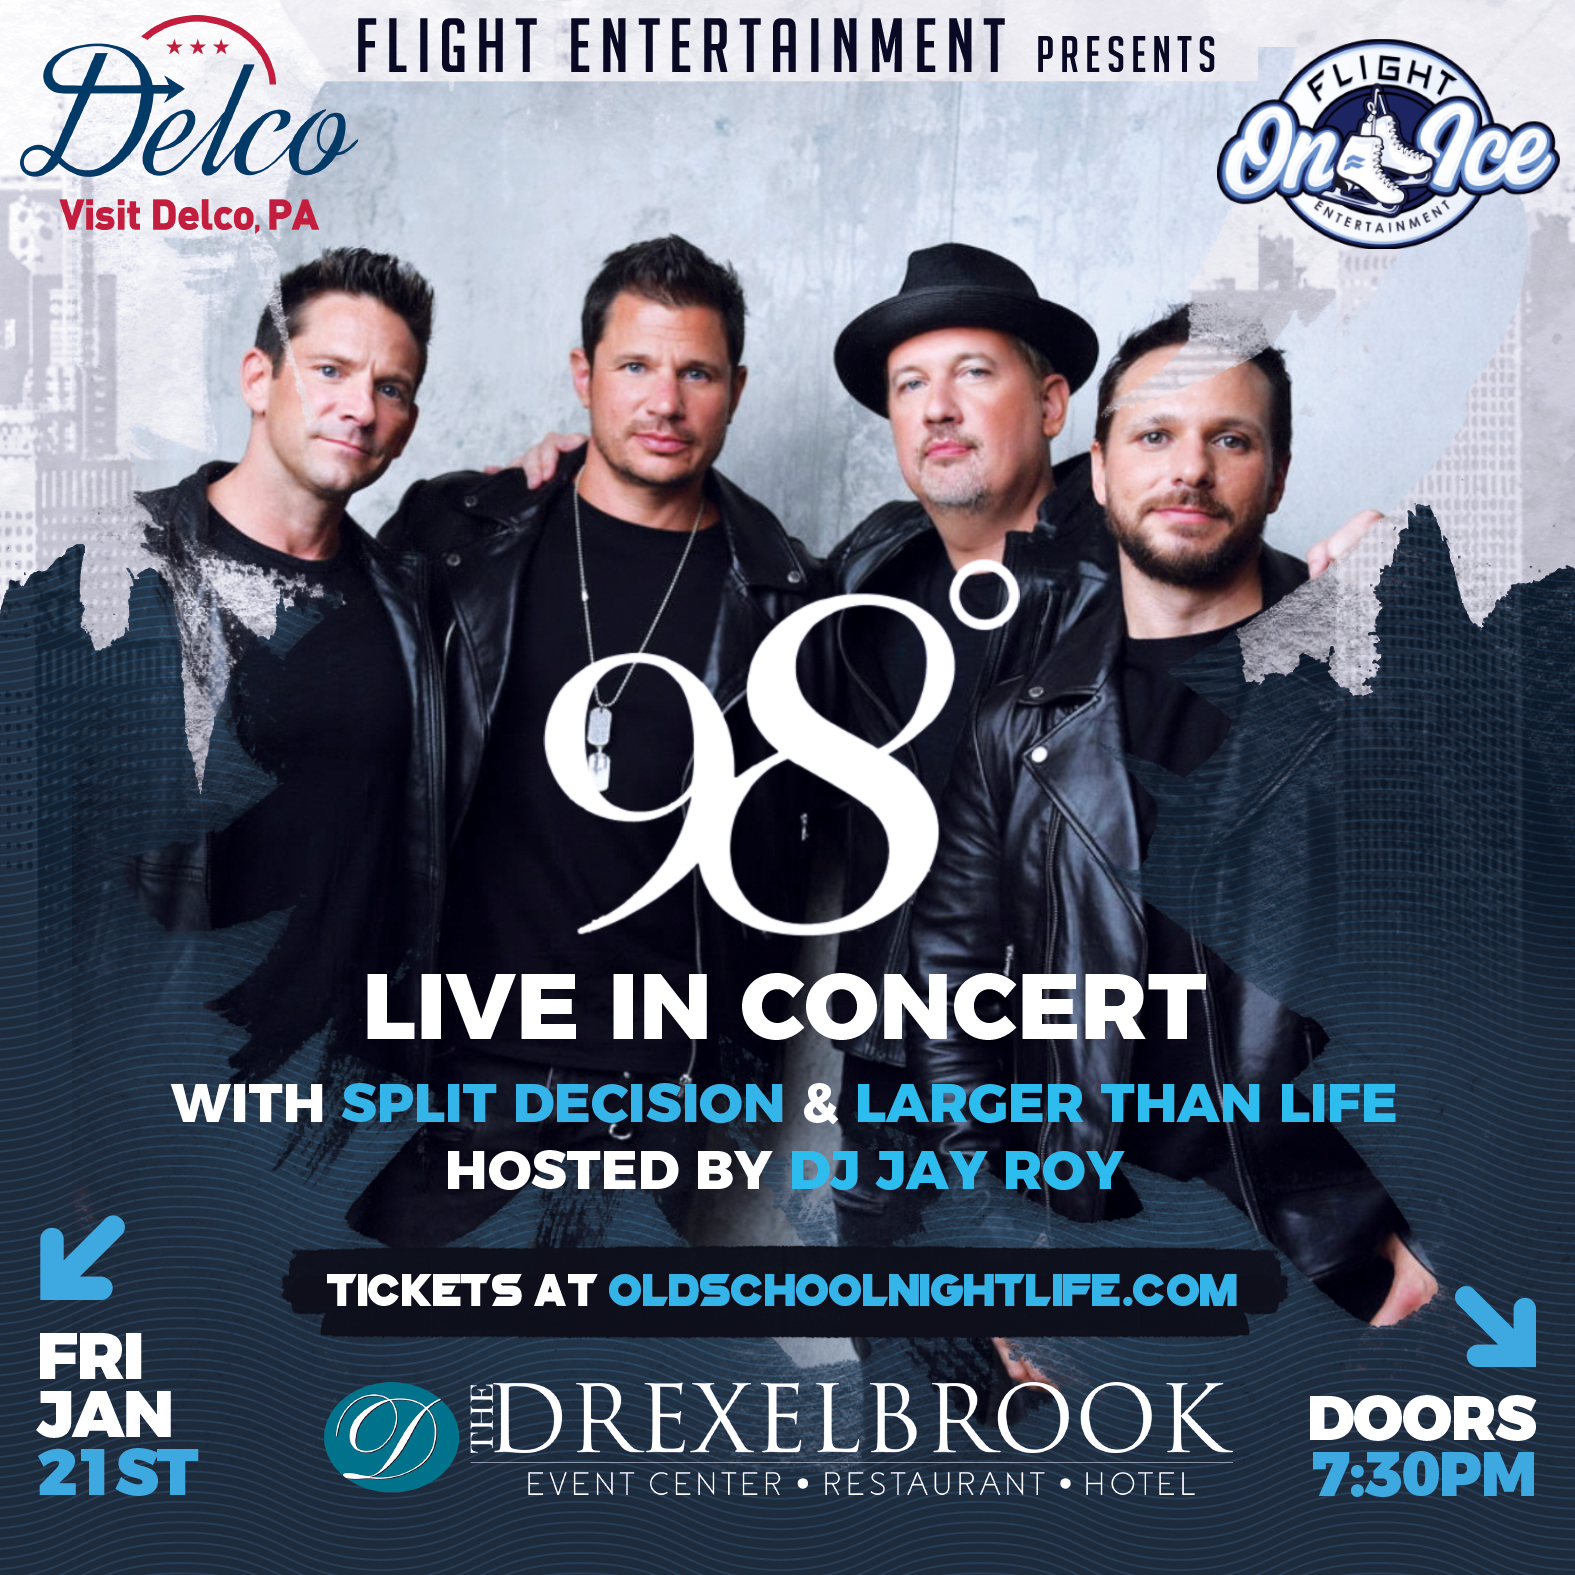 98 Degrees Live in Concert - Flight On Ice